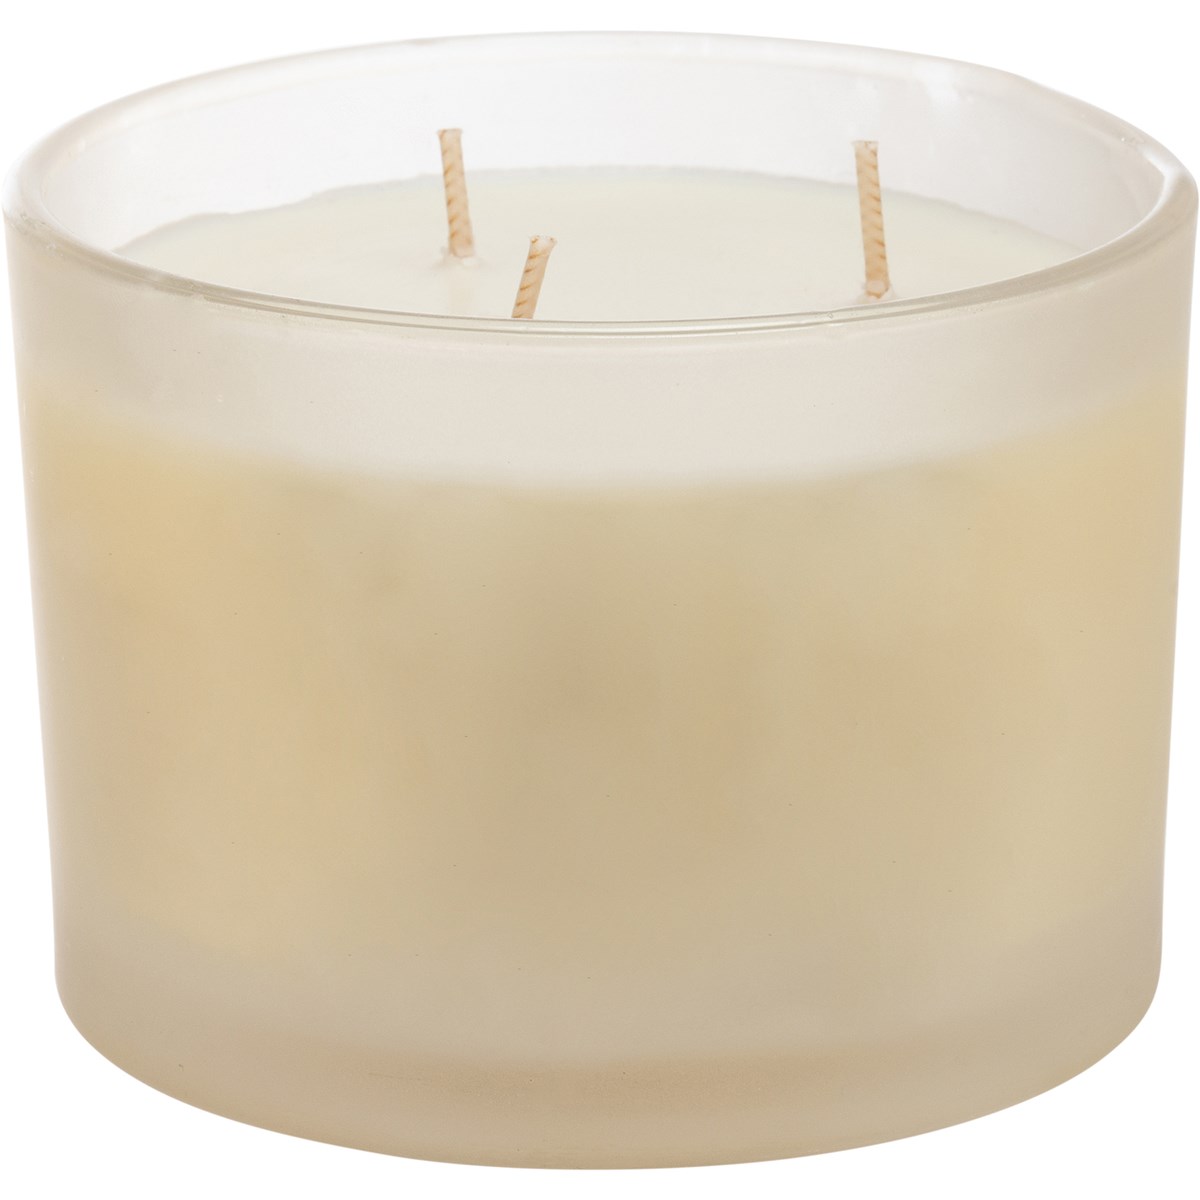 Two To Three Glasses Of Wine Per Day Candle - Soy Wax, Glass, Cotton